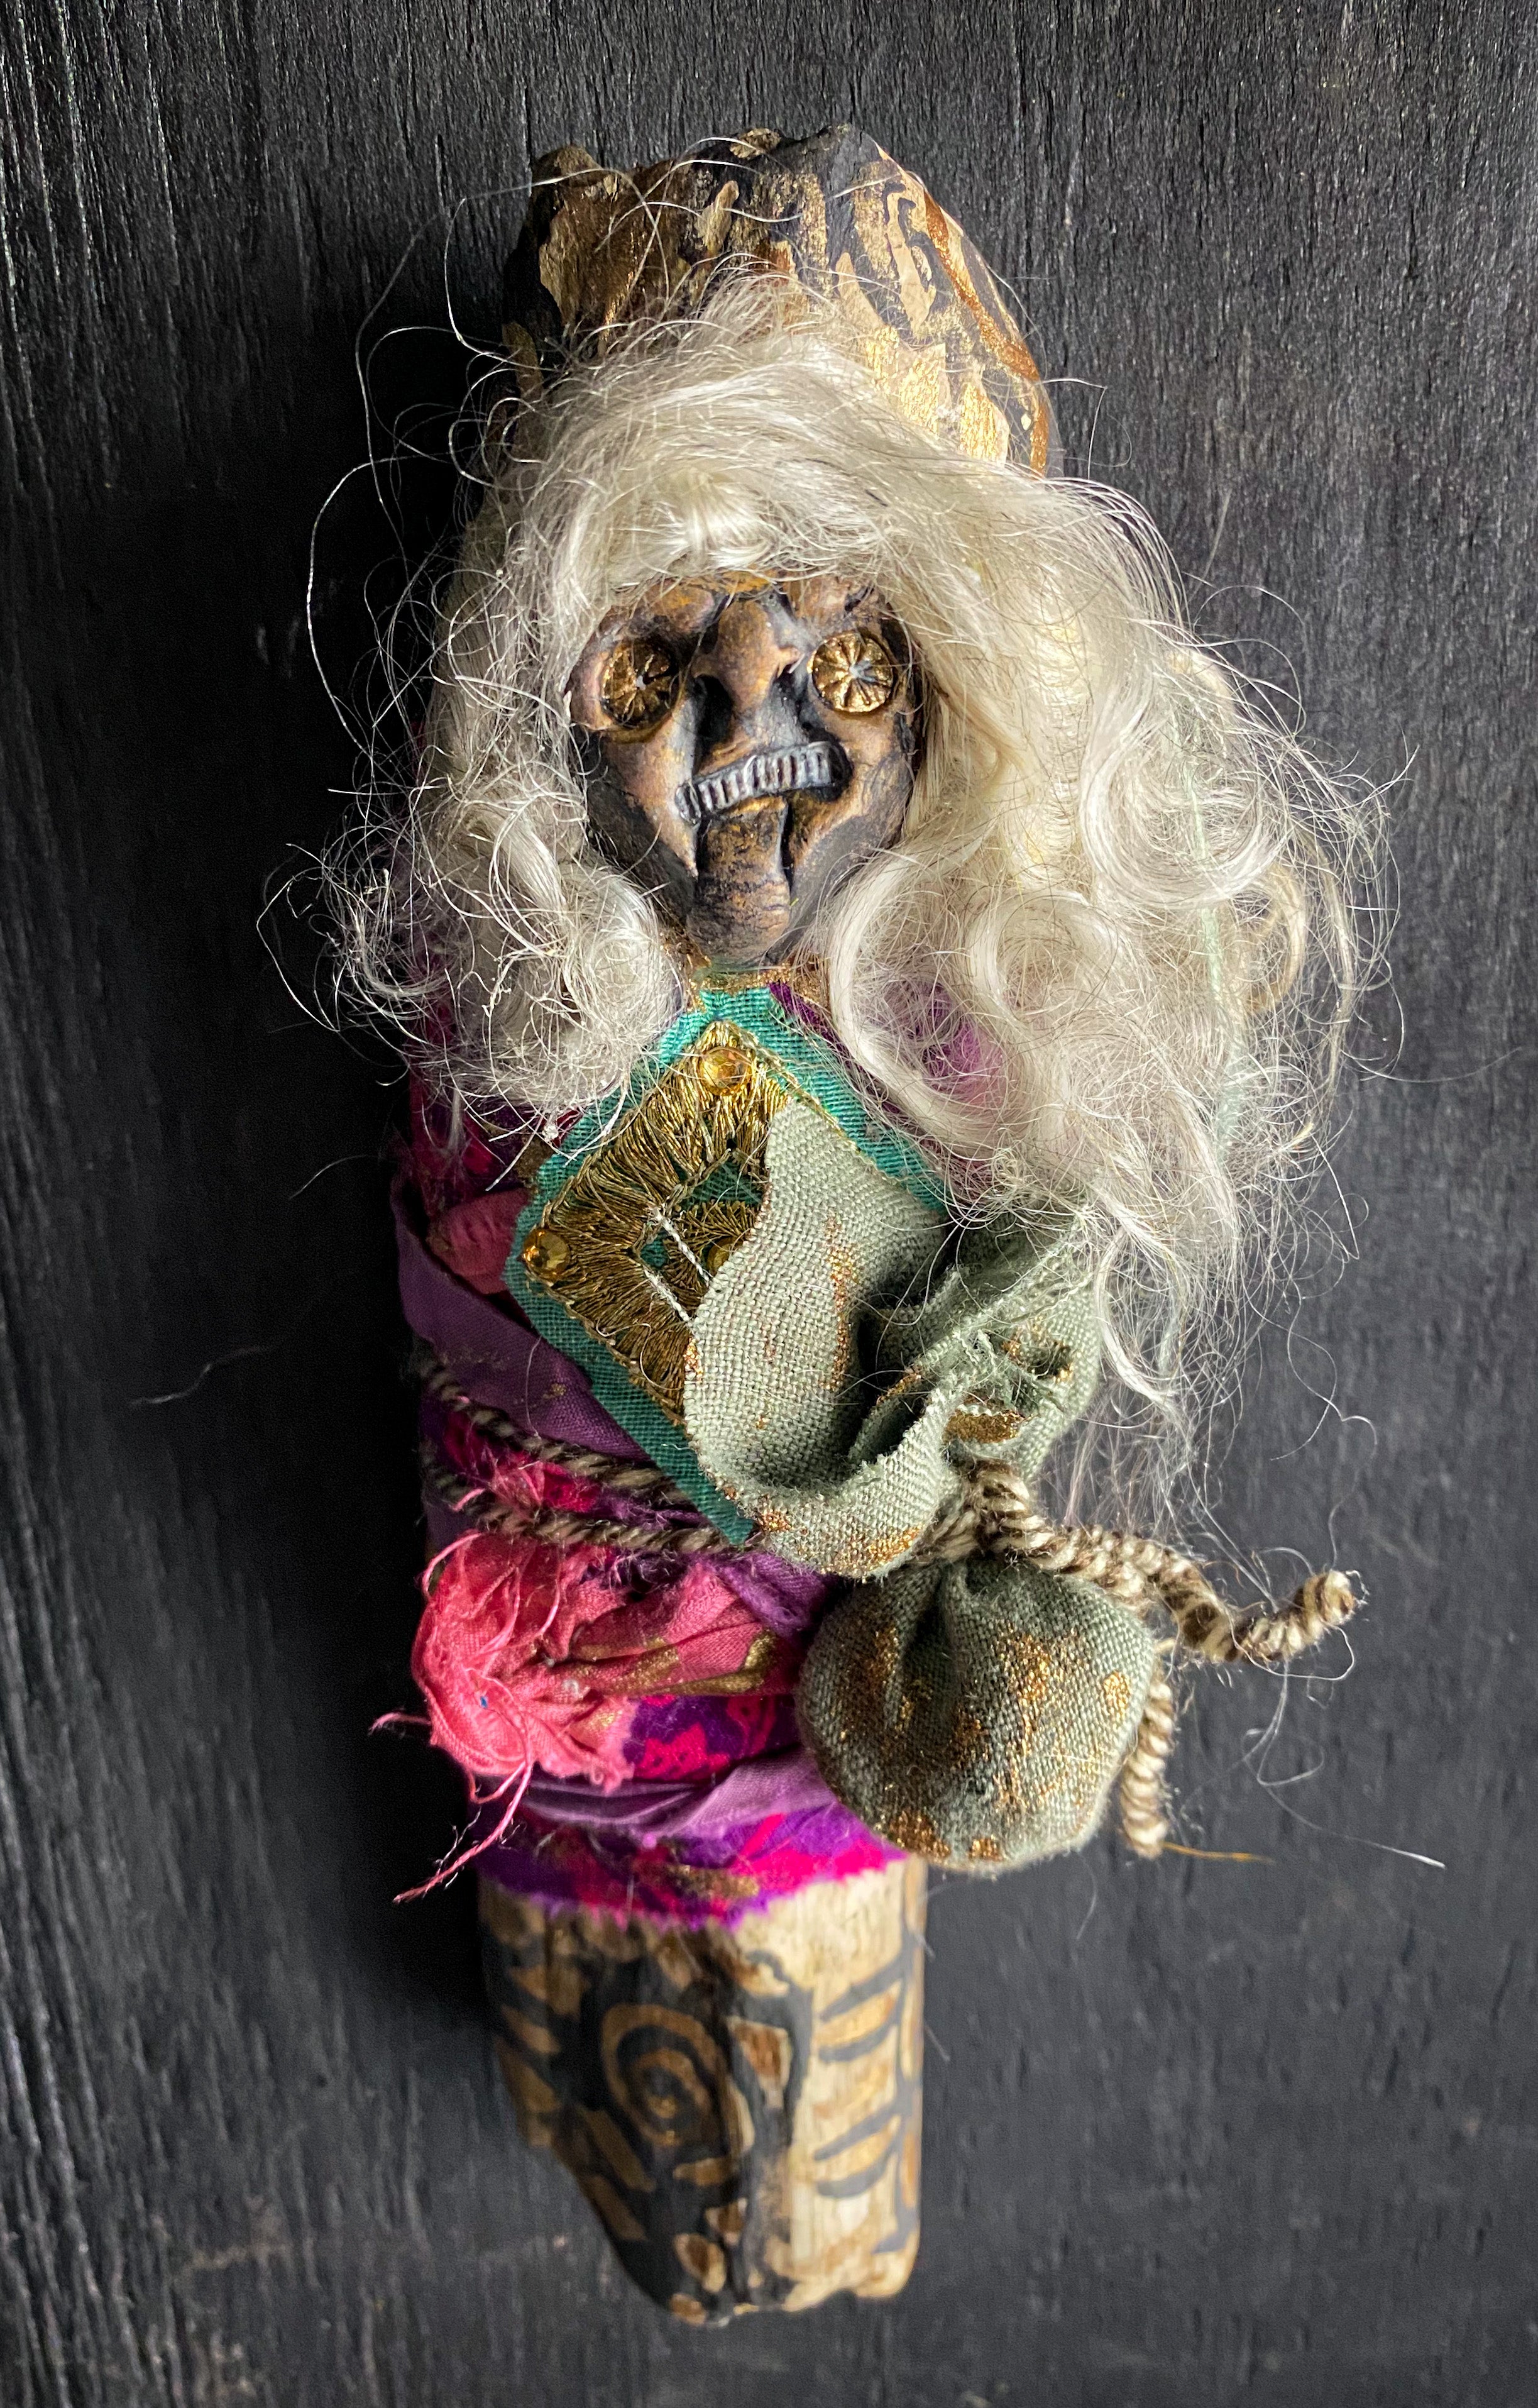 Conjure Doll for Courage and Creativity - Spirit Doll - Medicine Doll - JuJu Doll - Women of the World Series